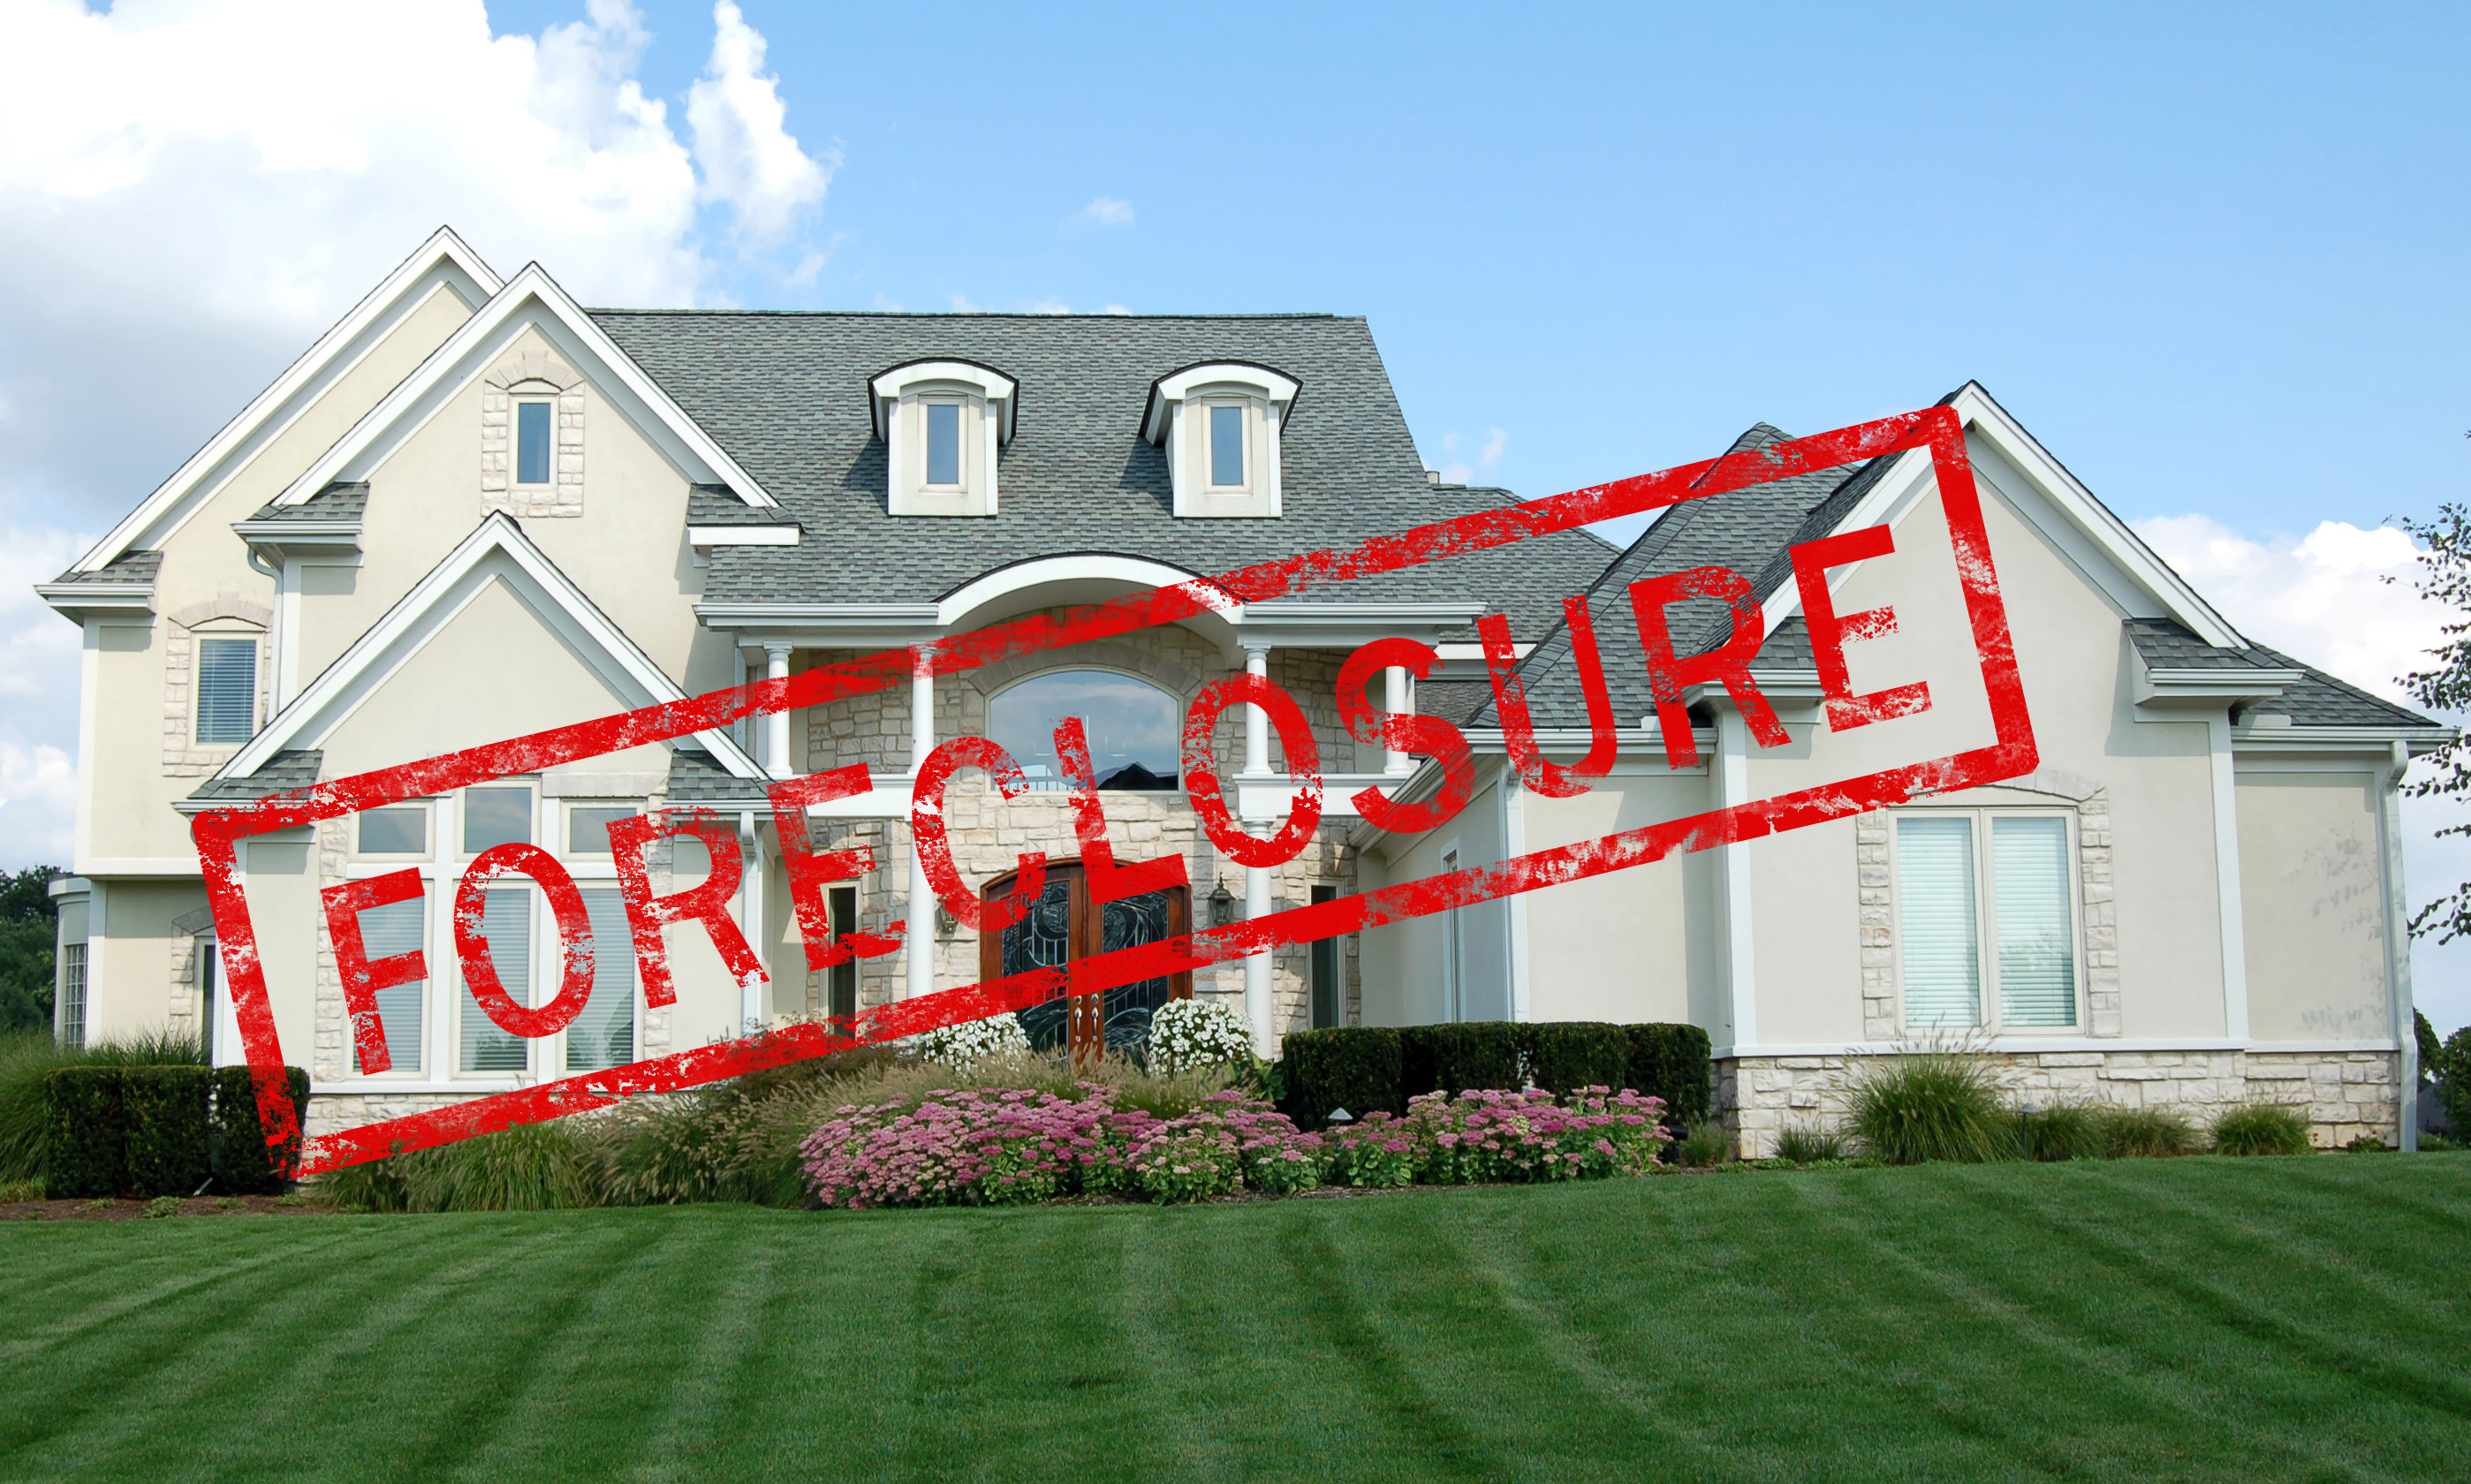 Call Western Real Estate Appraisals, LLC to discuss valuations of El Paso foreclosures